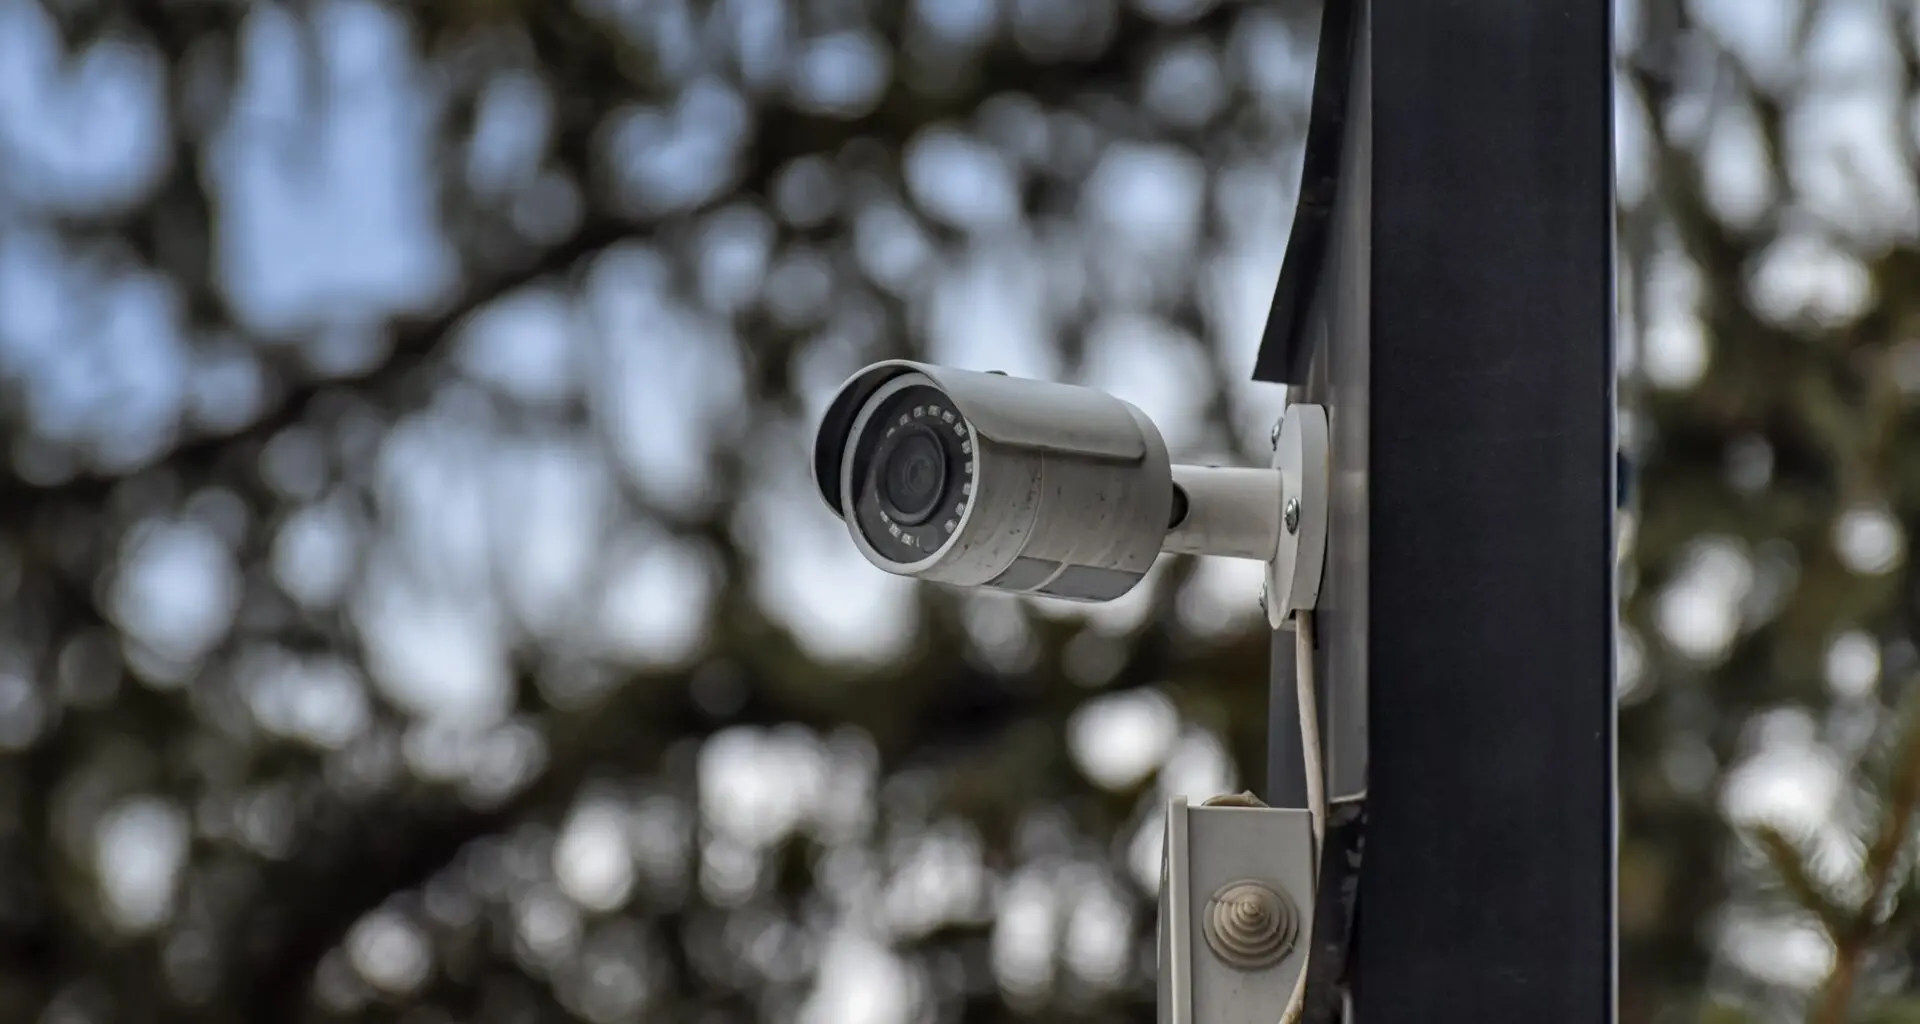 A security camera is attached to a pole with a blurred backdrop of tree branches.